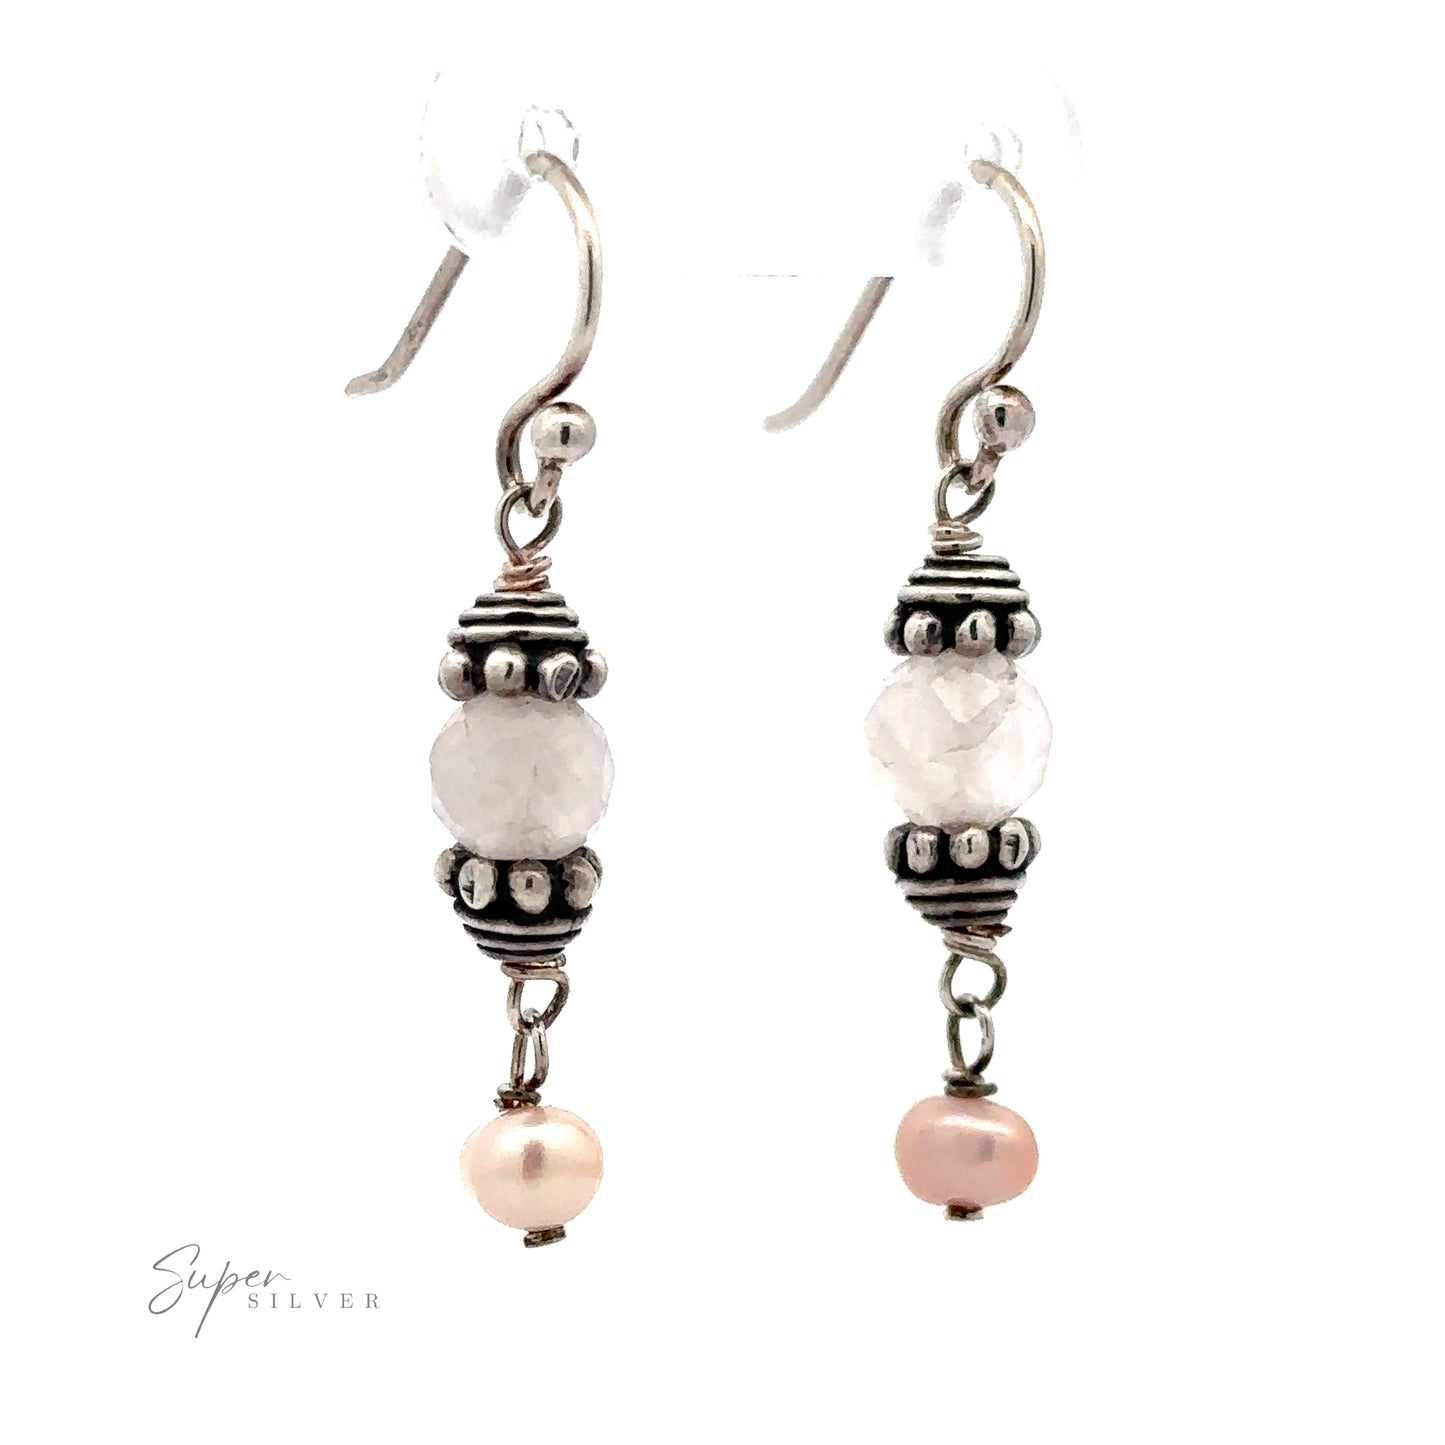 
                  
                    Certainly! Here is the sentence with the product name replaced:

A pair of Beaded Pink and Pearl Earrings featuring a central faceted bead flanked by decorative metal accents and a small pink pearl at the bottom.
                  
                